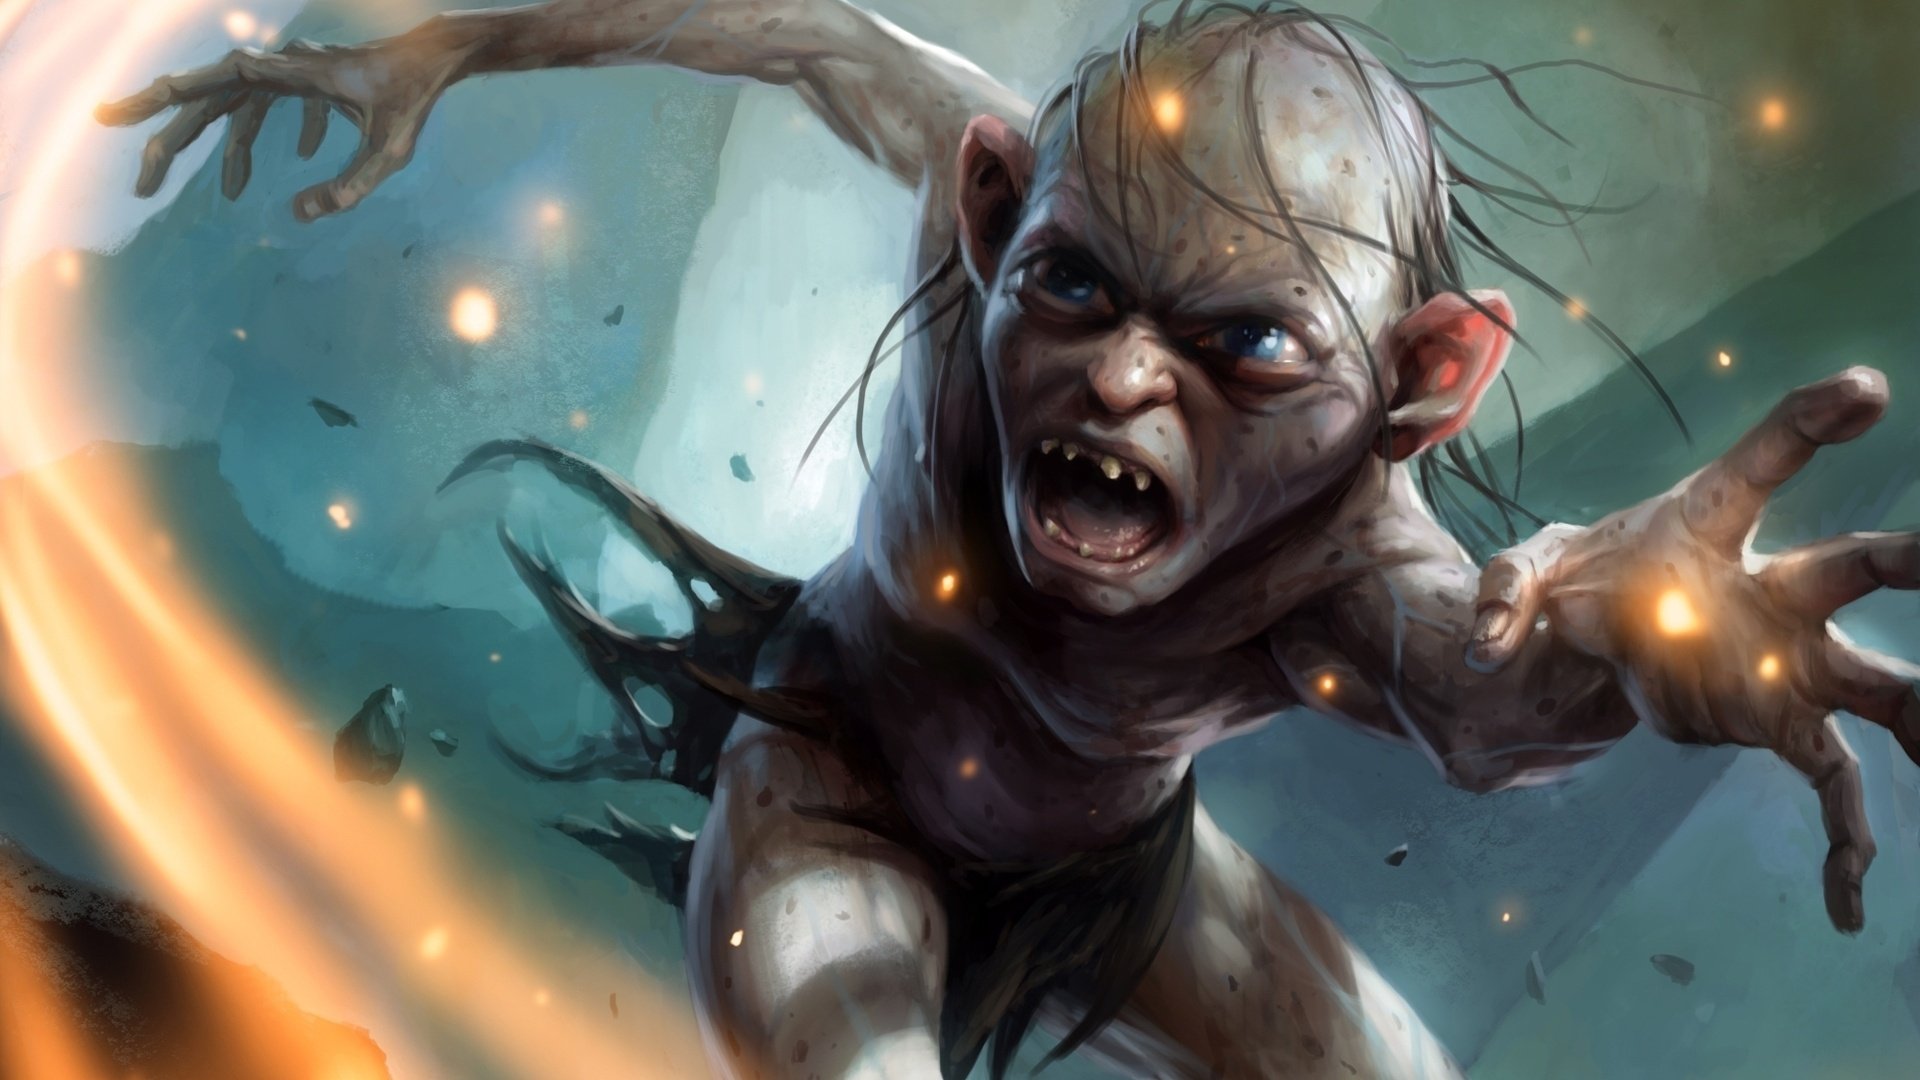 Elves Monster Guardians Of Middle Earth Gollum Games Fantasy Elf Lotr Lord Rings Creature Wallpapers Hd Desktop And Mobile Backgrounds